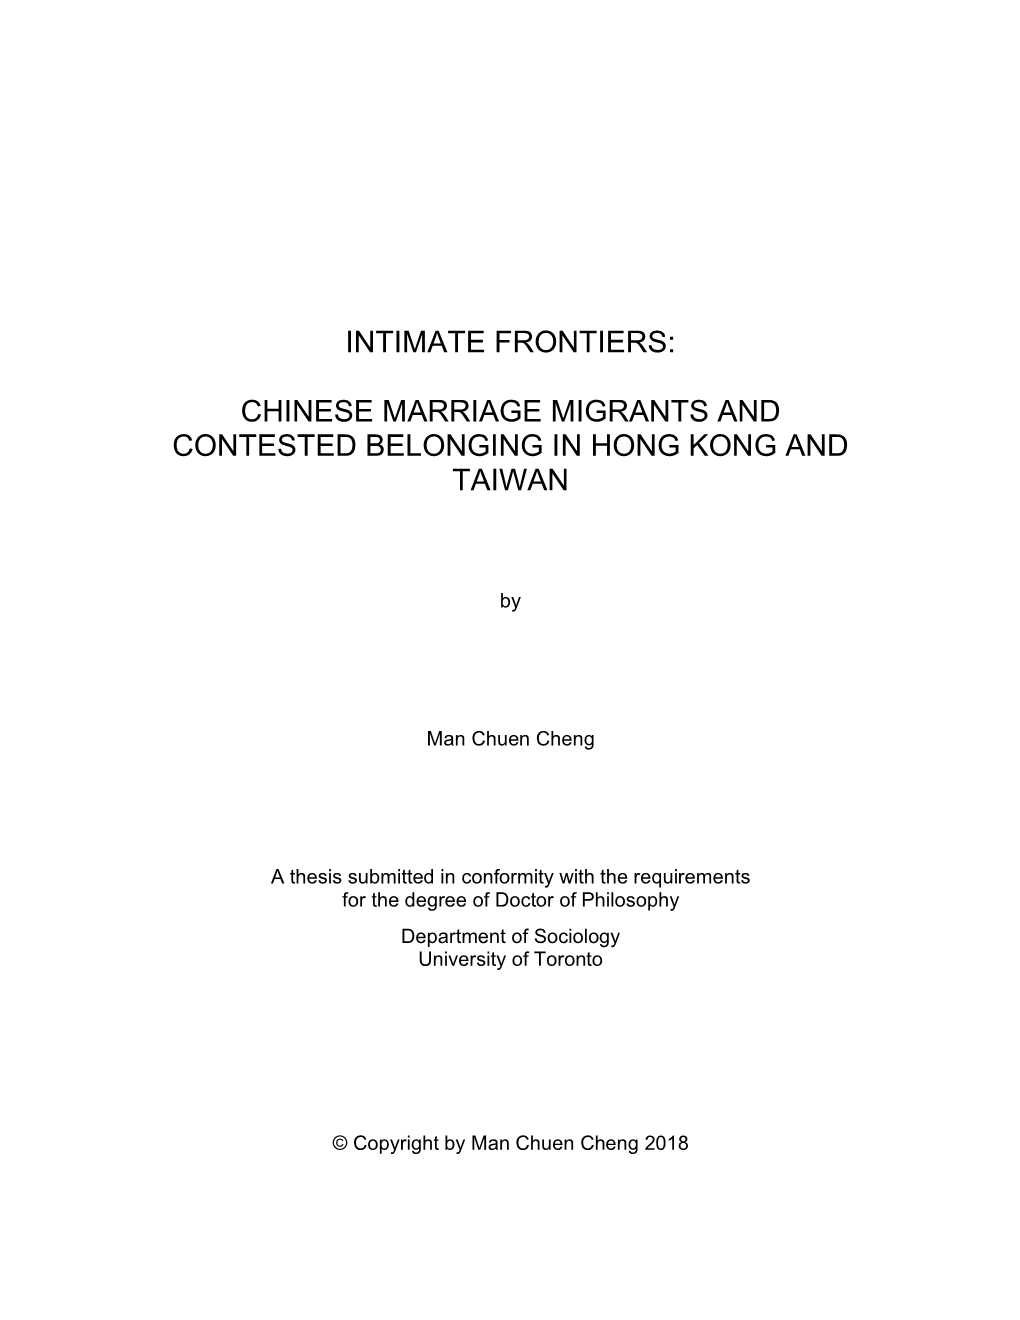 Chinese Marriage Migrants and Contested Belonging in Hong Kong and Taiwan